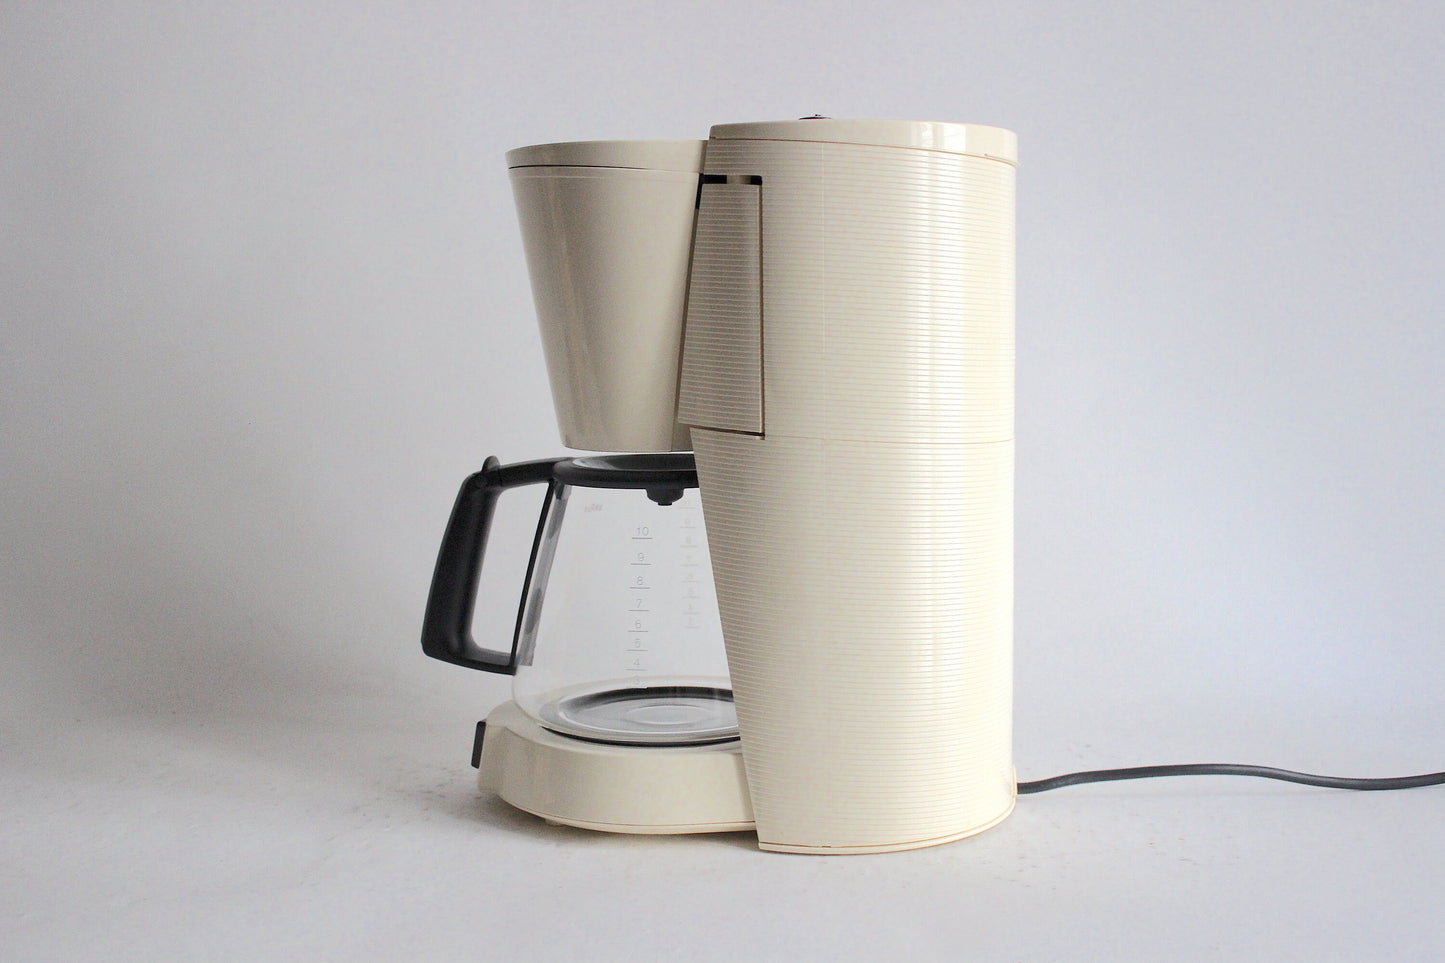 BRAUN Aroma Select FK130 "Living Colors" Vanilla Filter coffee maker. Germany 1990s